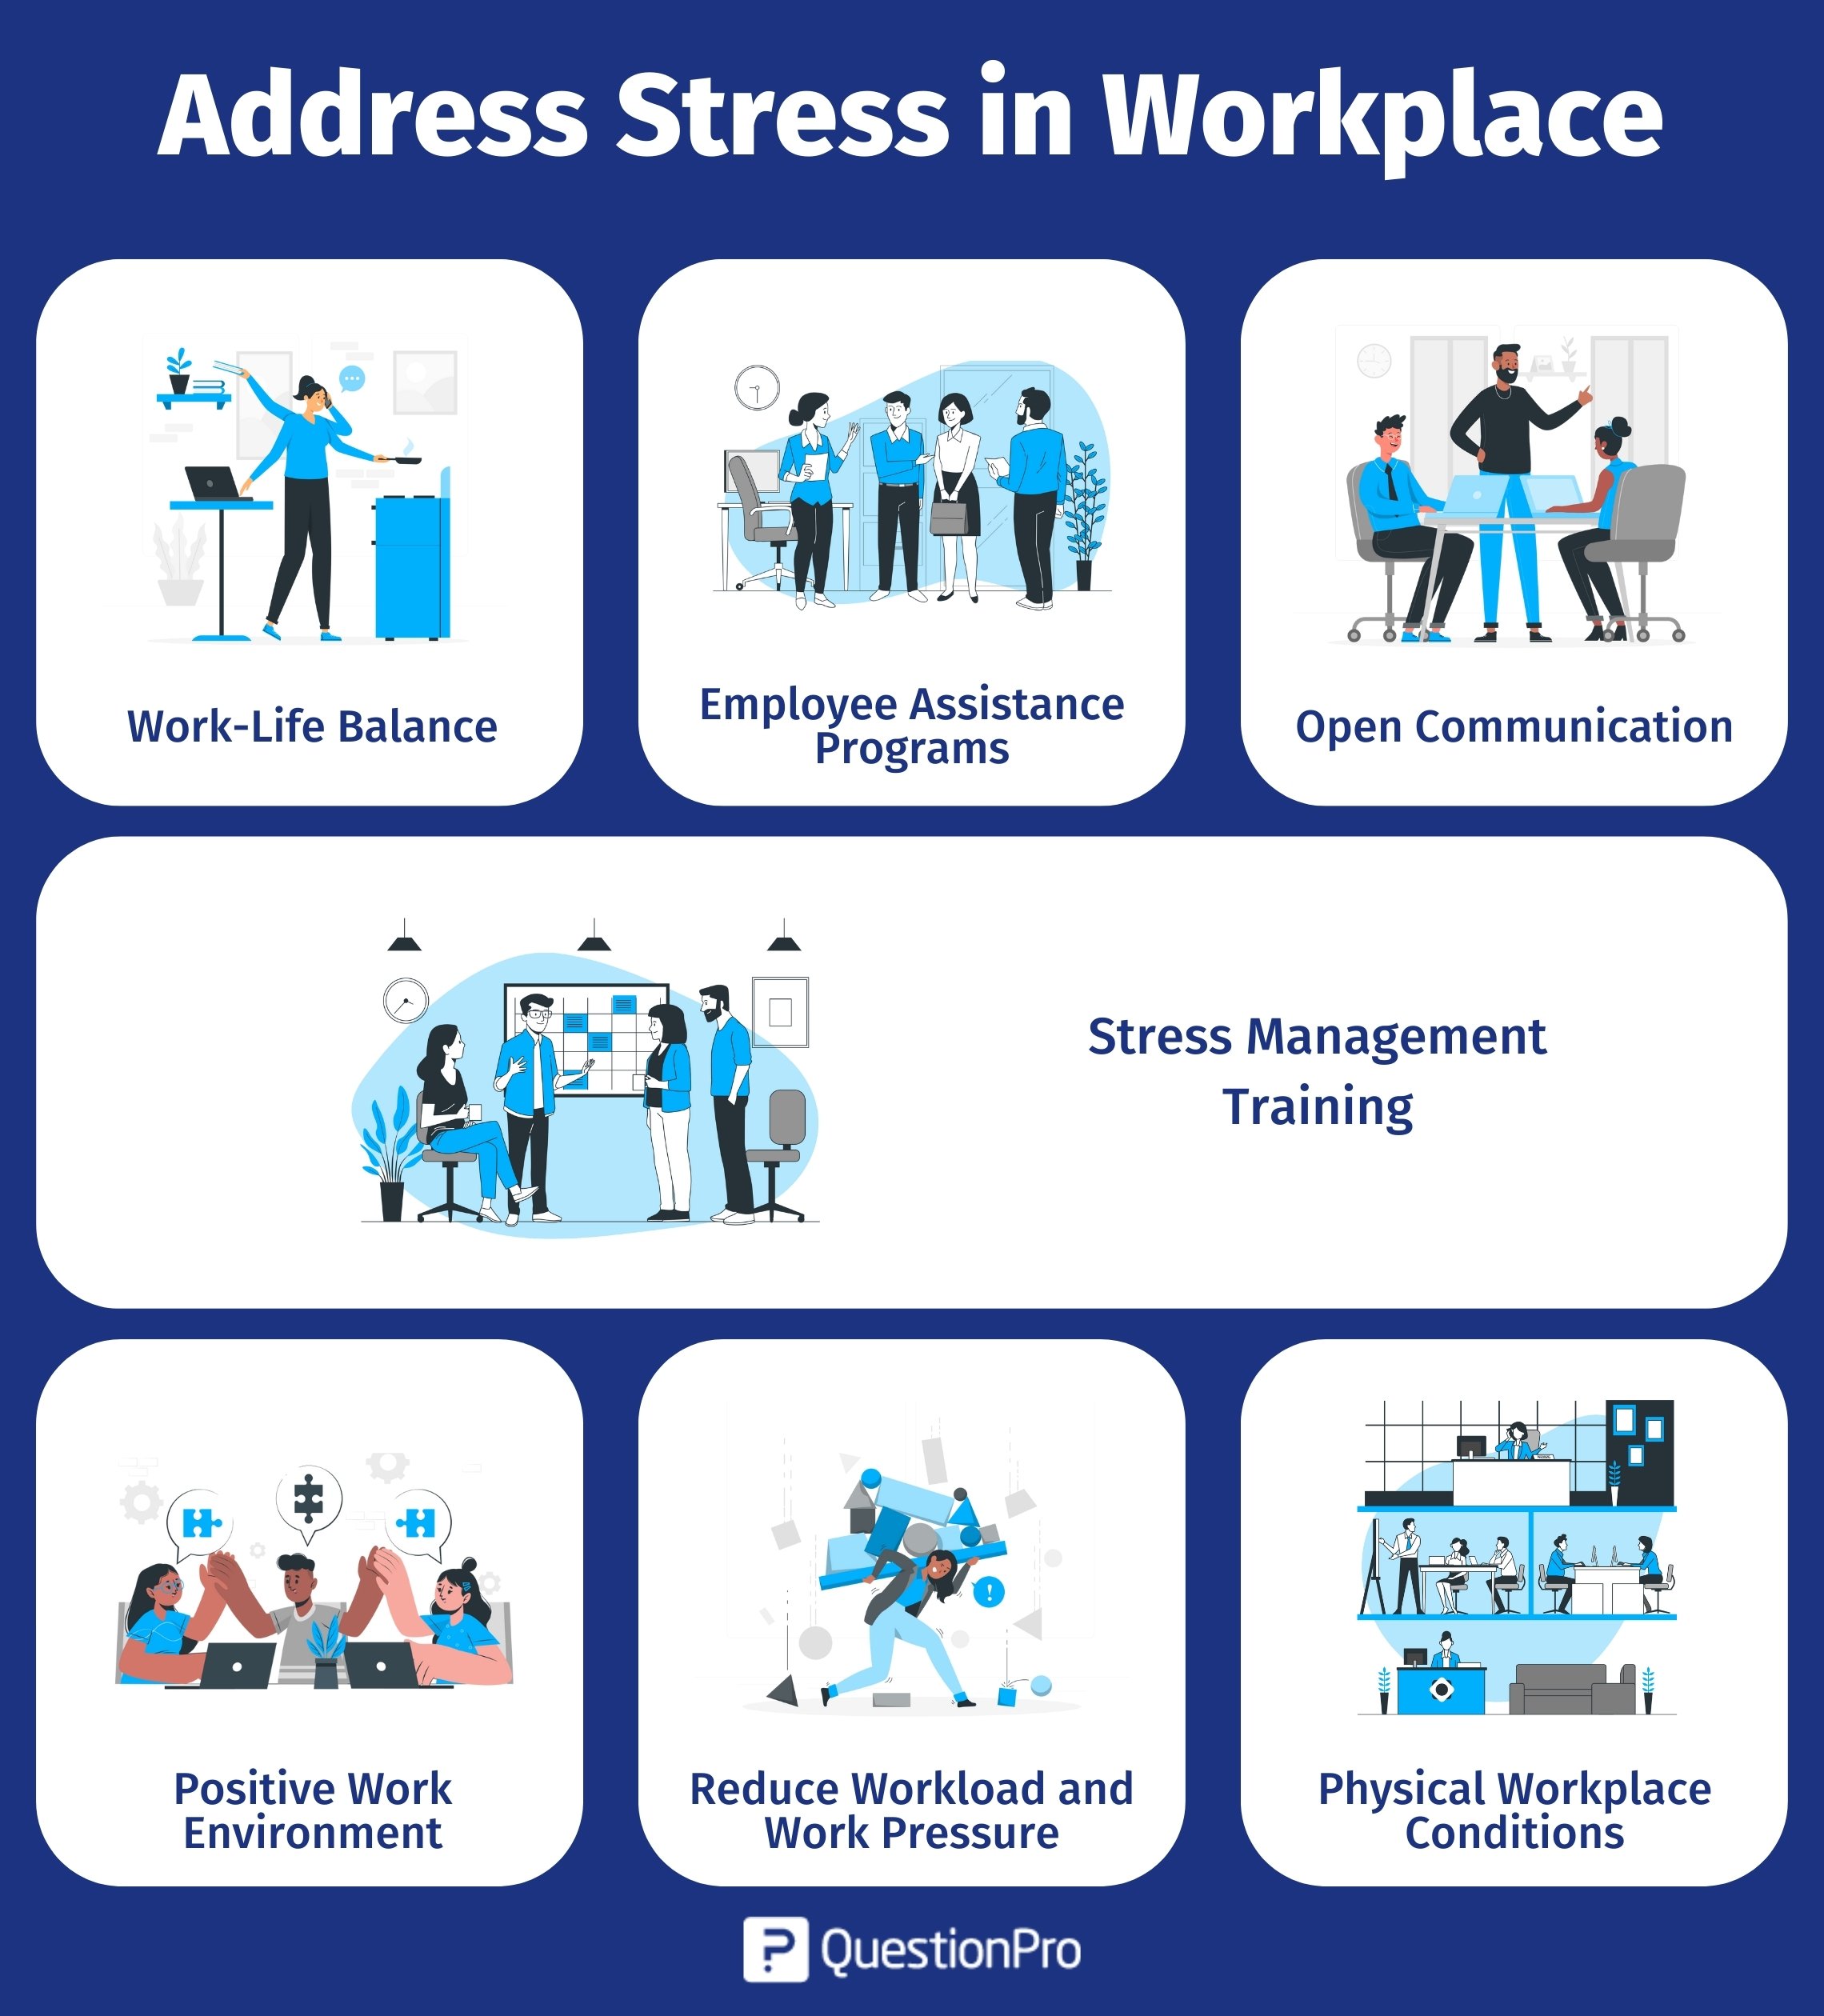 Stress management in the workplace